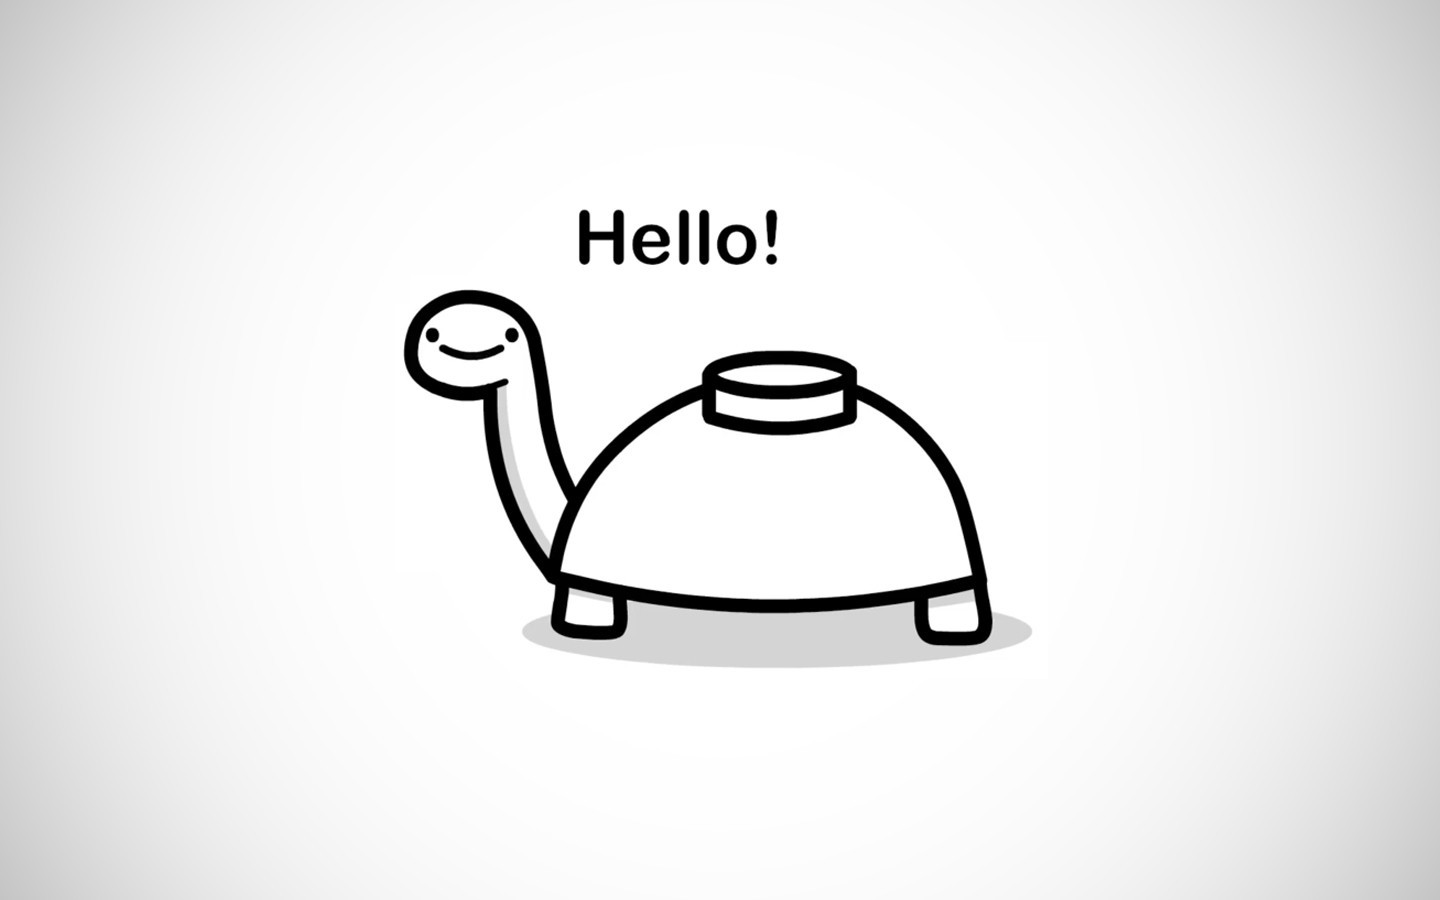 General 1440x900 turtle humor minimalism simple background animals reptiles white background typography